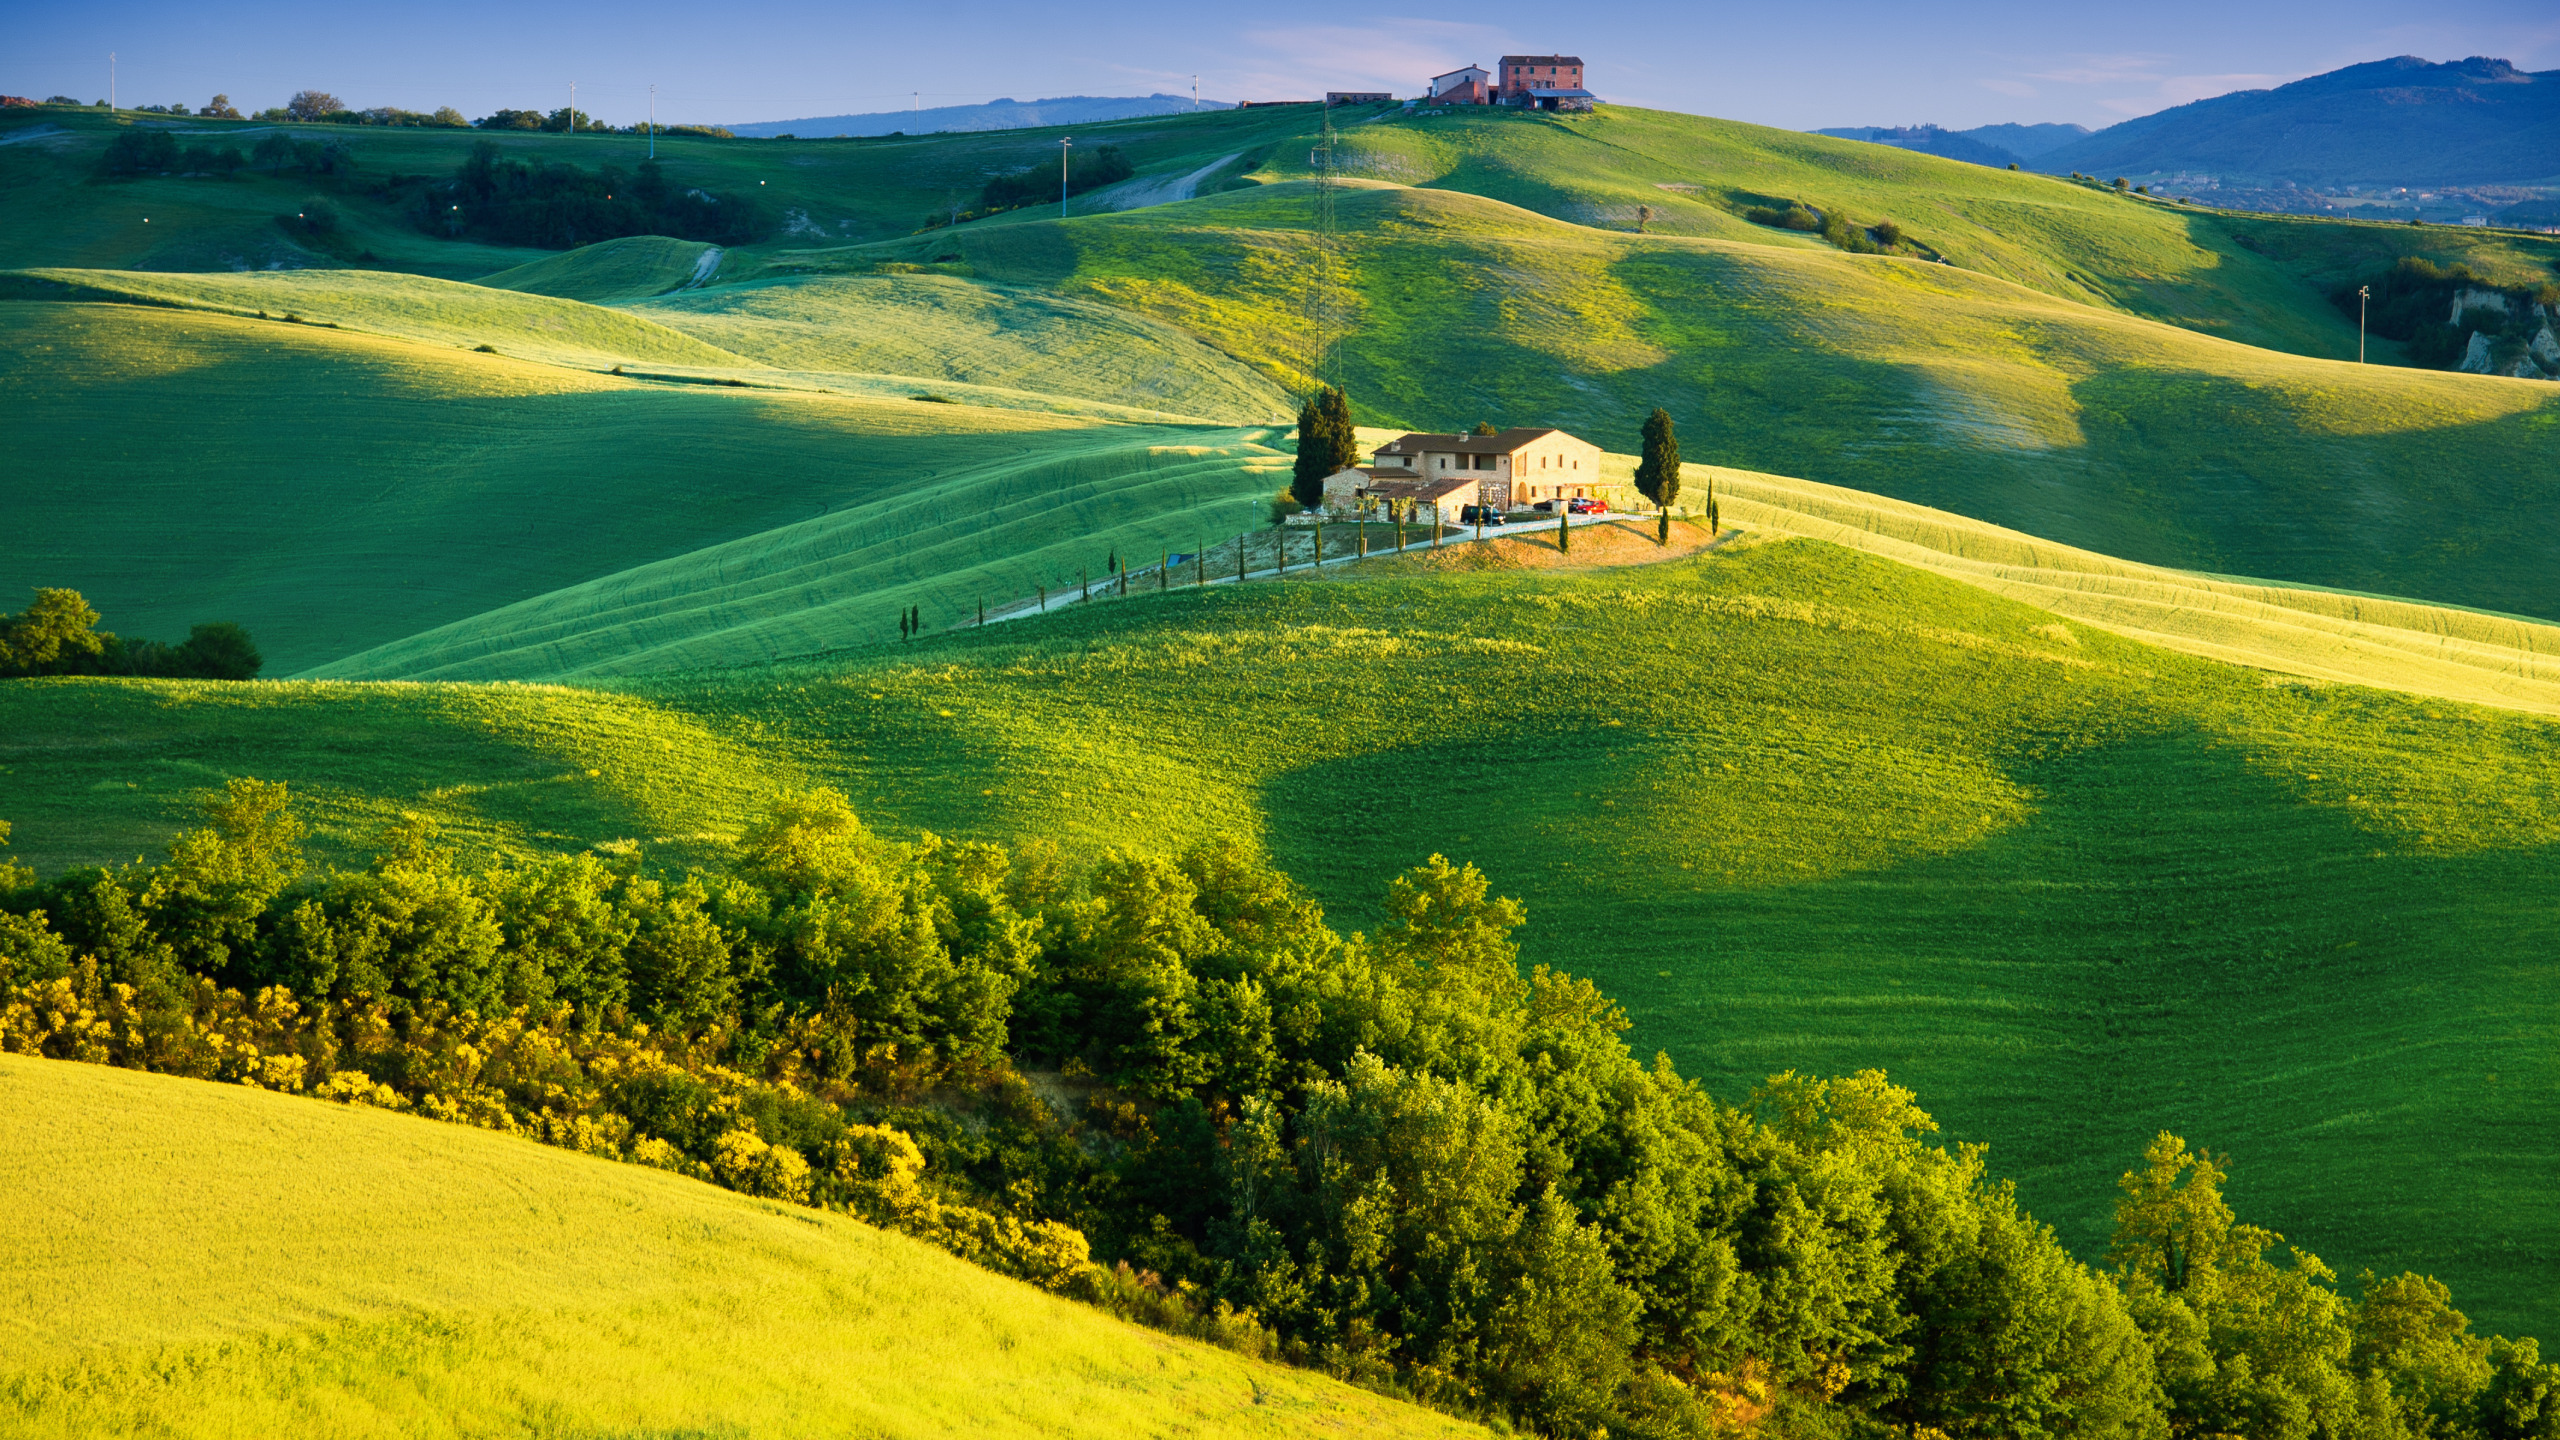 Download wallpaper summer, the sky, trees, landscape, nature, house, Italy, summer, house, Landscape, sky, trees, Italy, nature, the countryside, green field, section landscapes in resolution 2560x1440